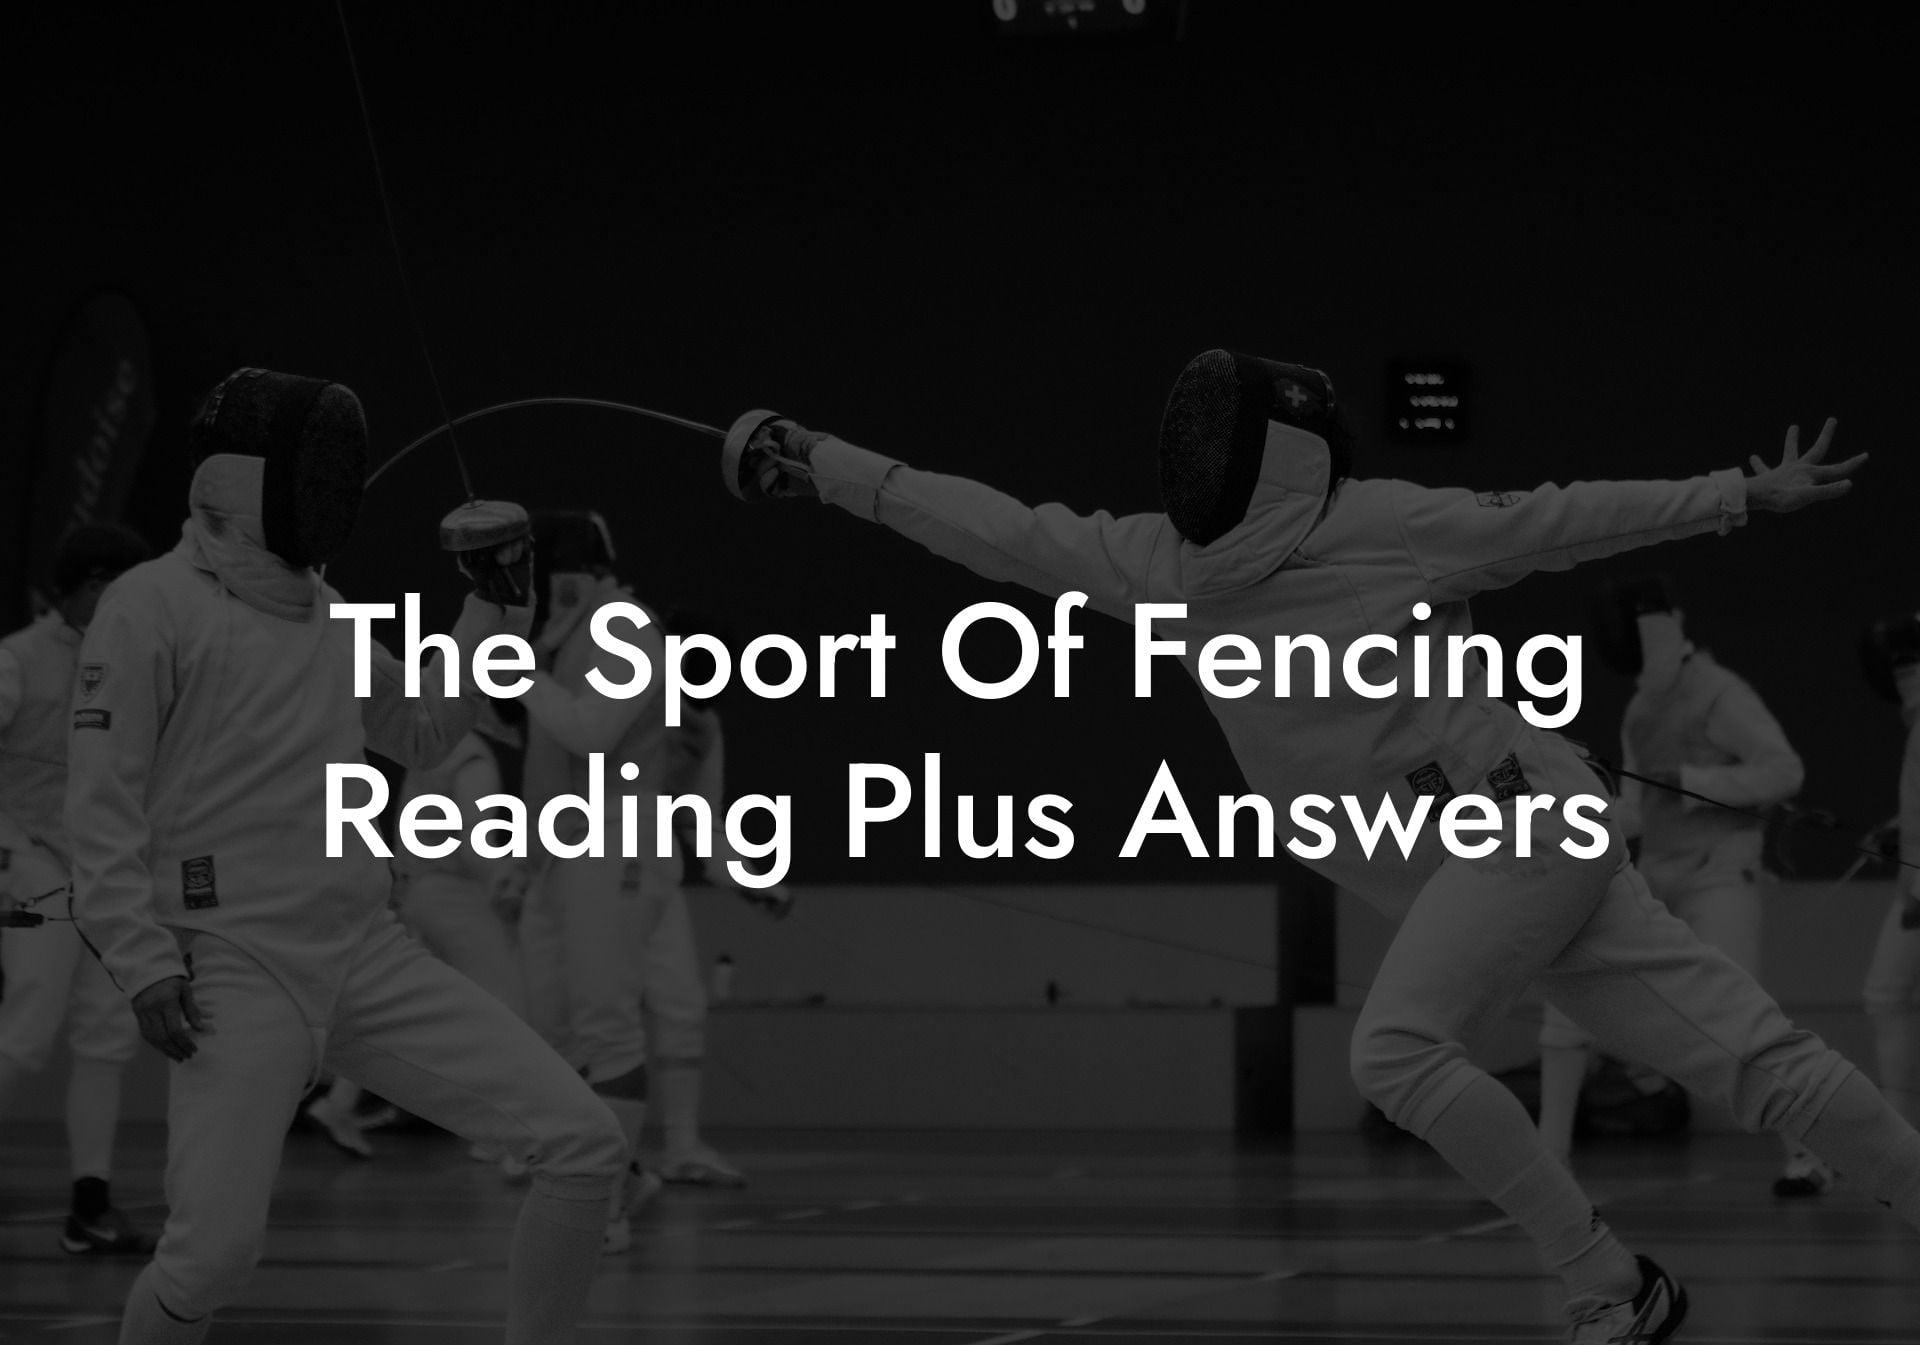 The Sport Of Fencing Reading Plus Answers